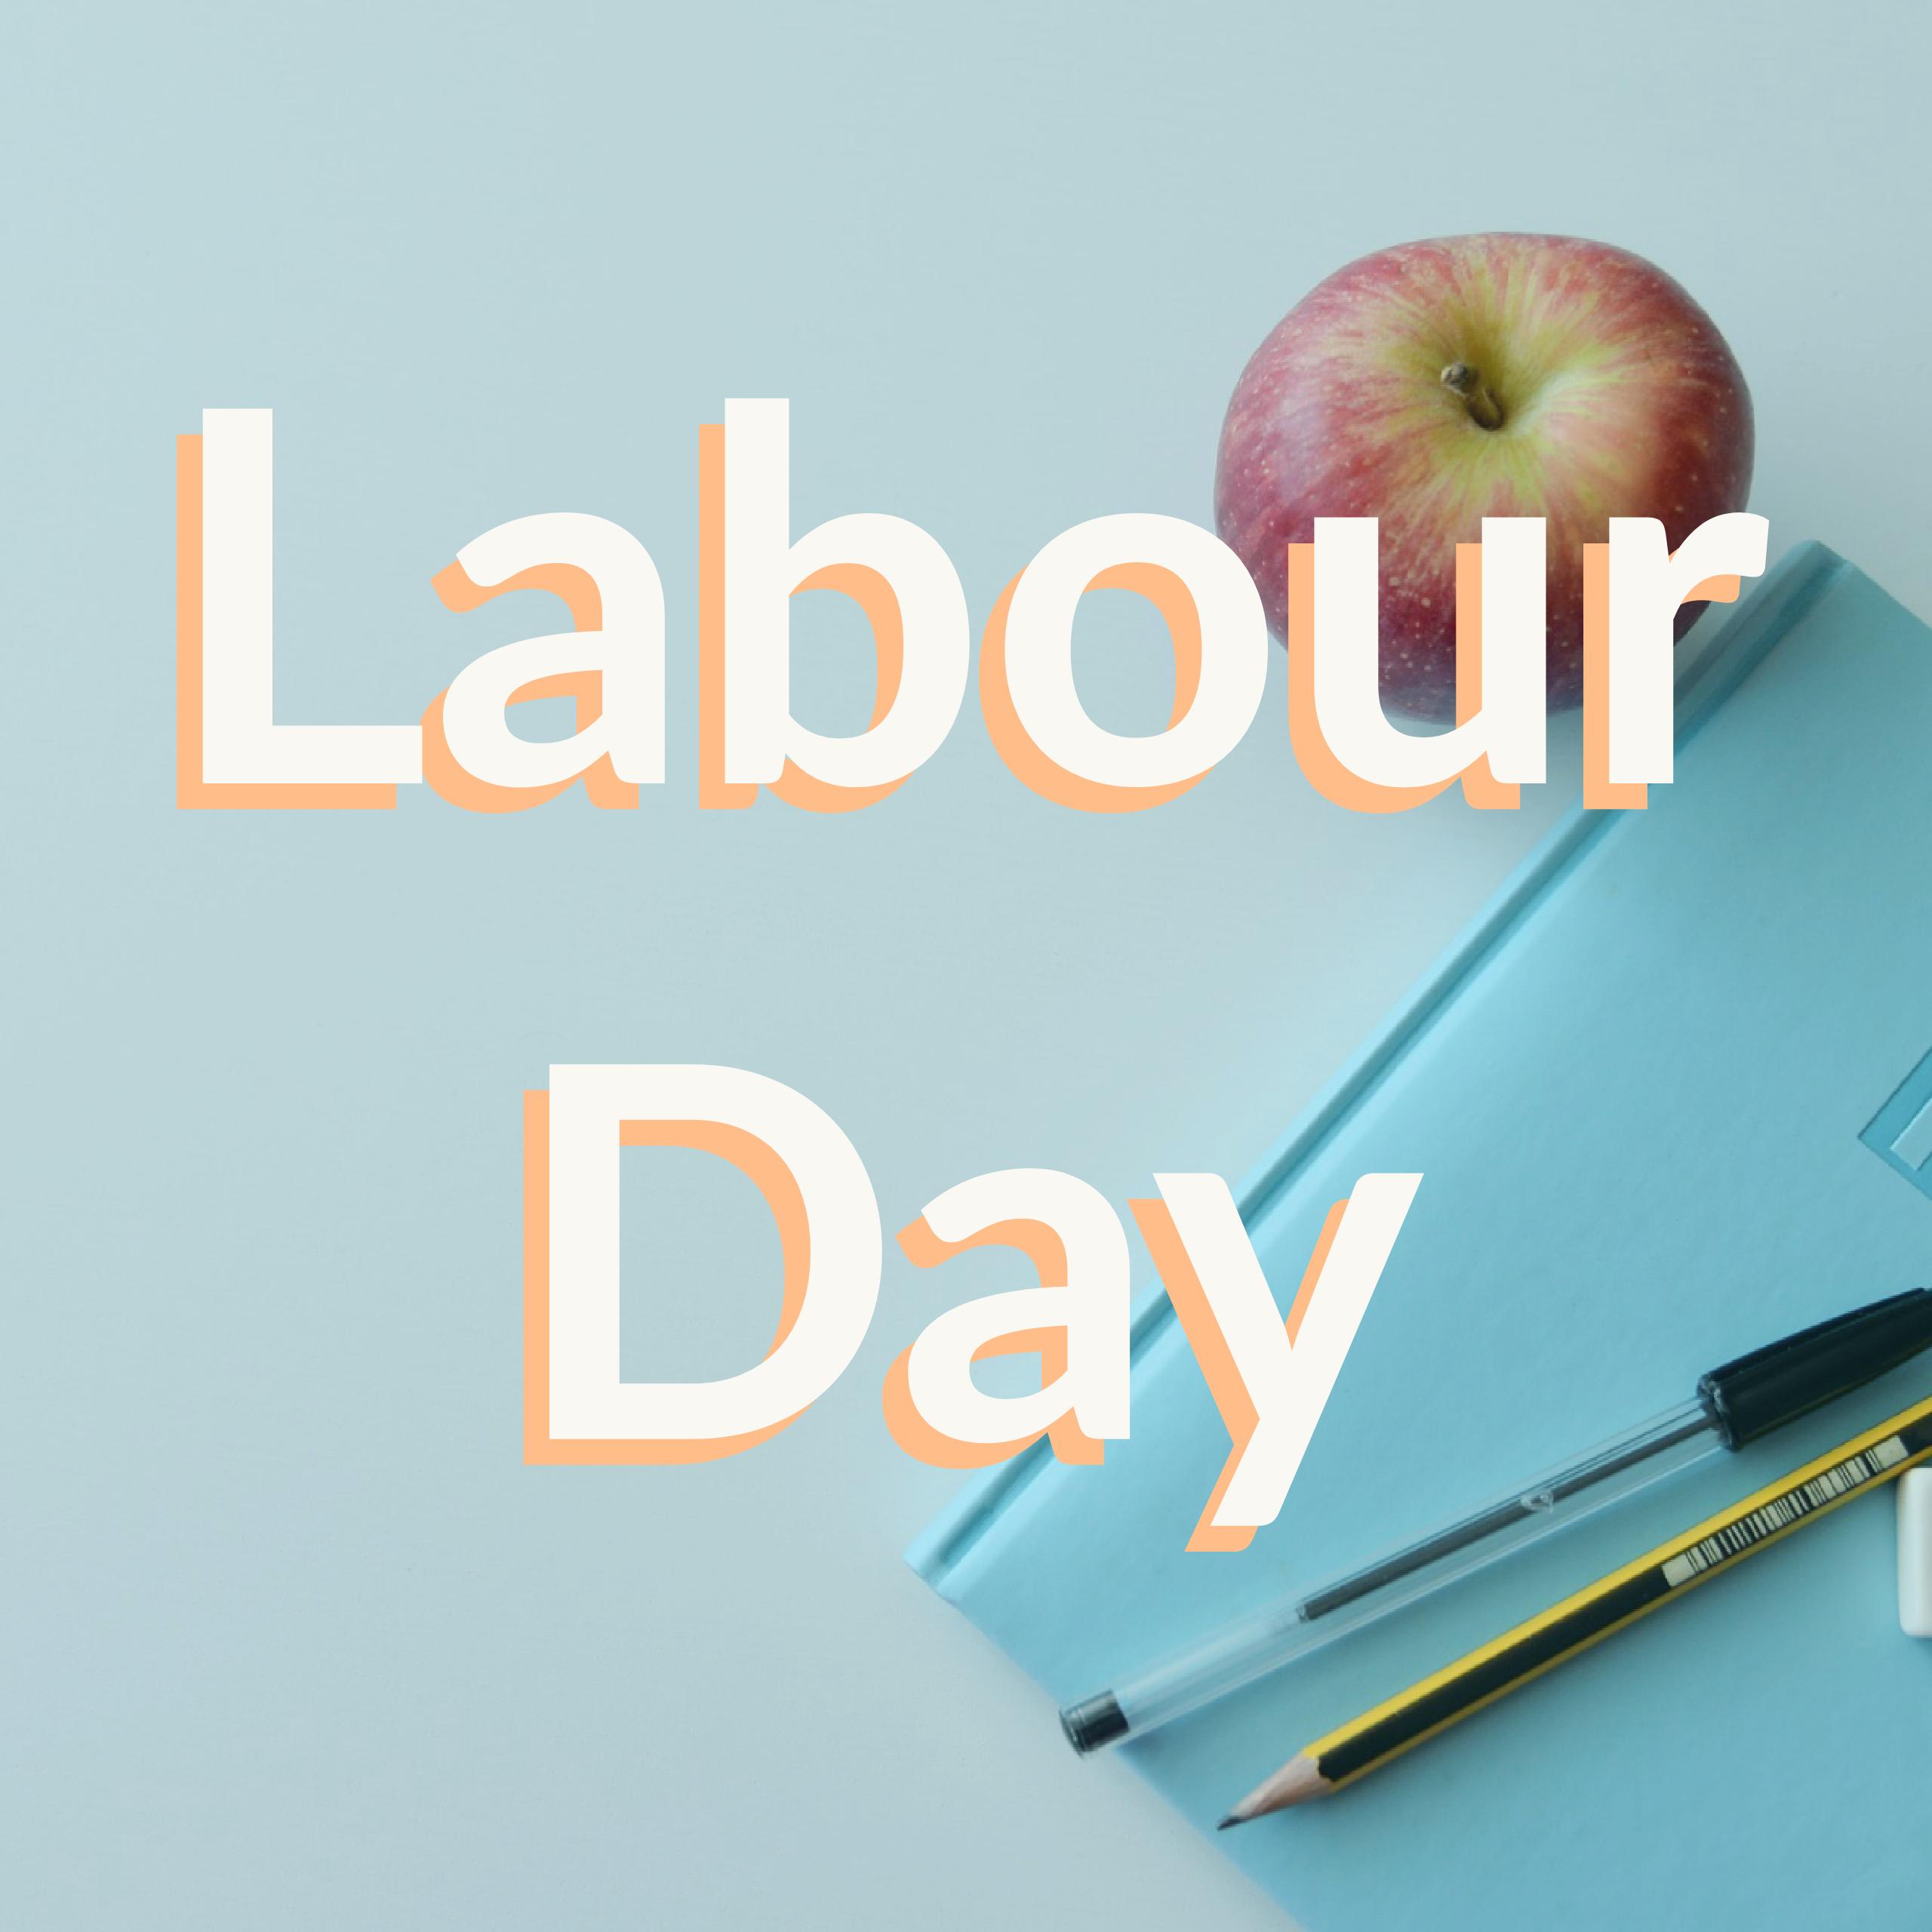 Labour Day Public Holiday